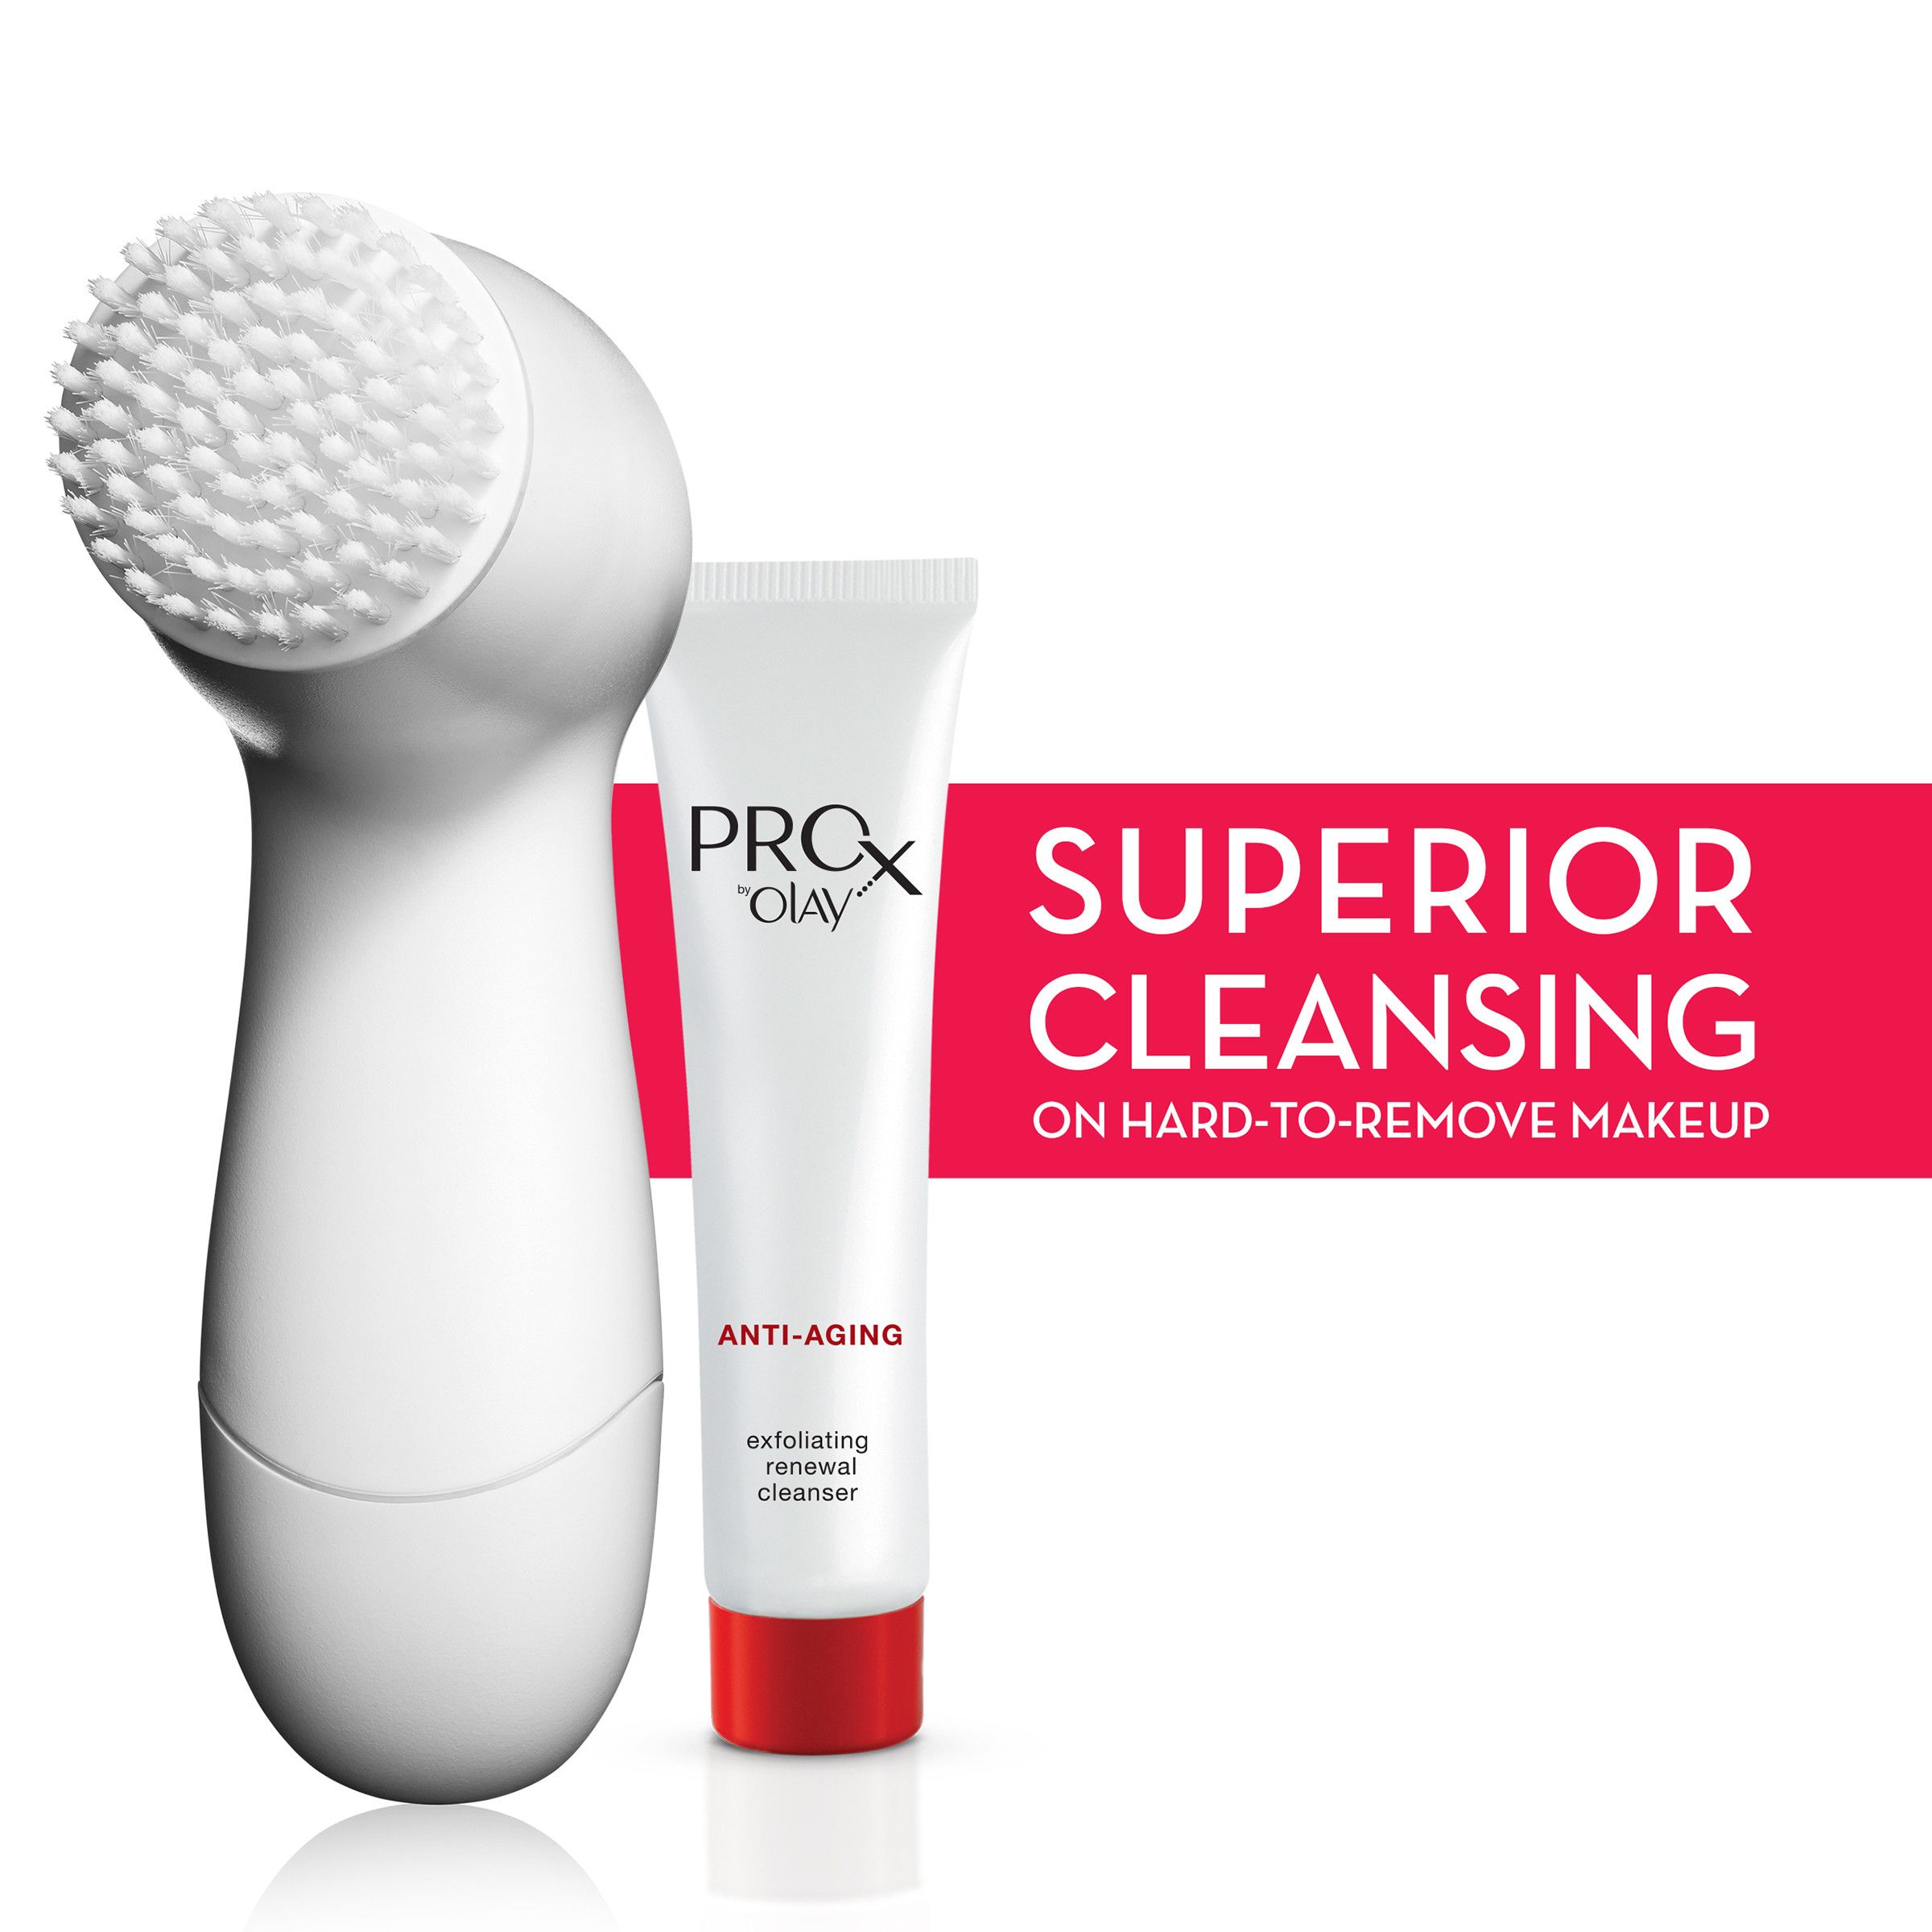 olay-pro-x-advanced-cleansing-system-review